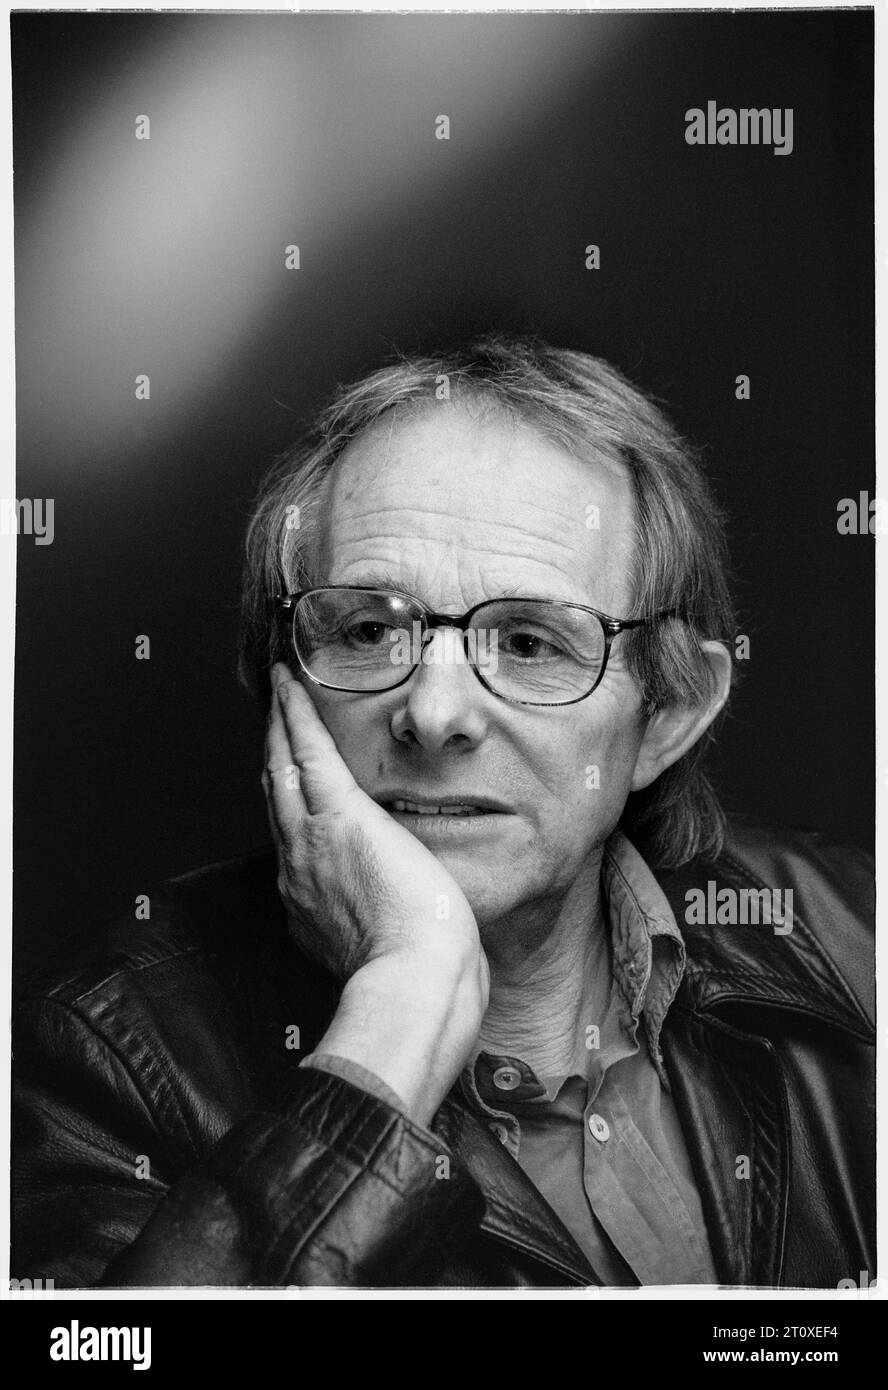 KEN LOACH, DIRECTOR, 1998: Film director Ken Loach at a Film Festival in Cardiff, Wales, UK to promote his film My Name Is Joe in August 1998. Picture: Rob Watkins. INFO: Ken Loach, a prolific British filmmaker, is celebrated for his socially conscious and politically charged films. With a career spanning decades, his works like "Kes," "The Wind That Shakes the Barley," and "I, Daniel Blake" illuminate societal issues, earning him numerous awards and international recognition. Stock Photo